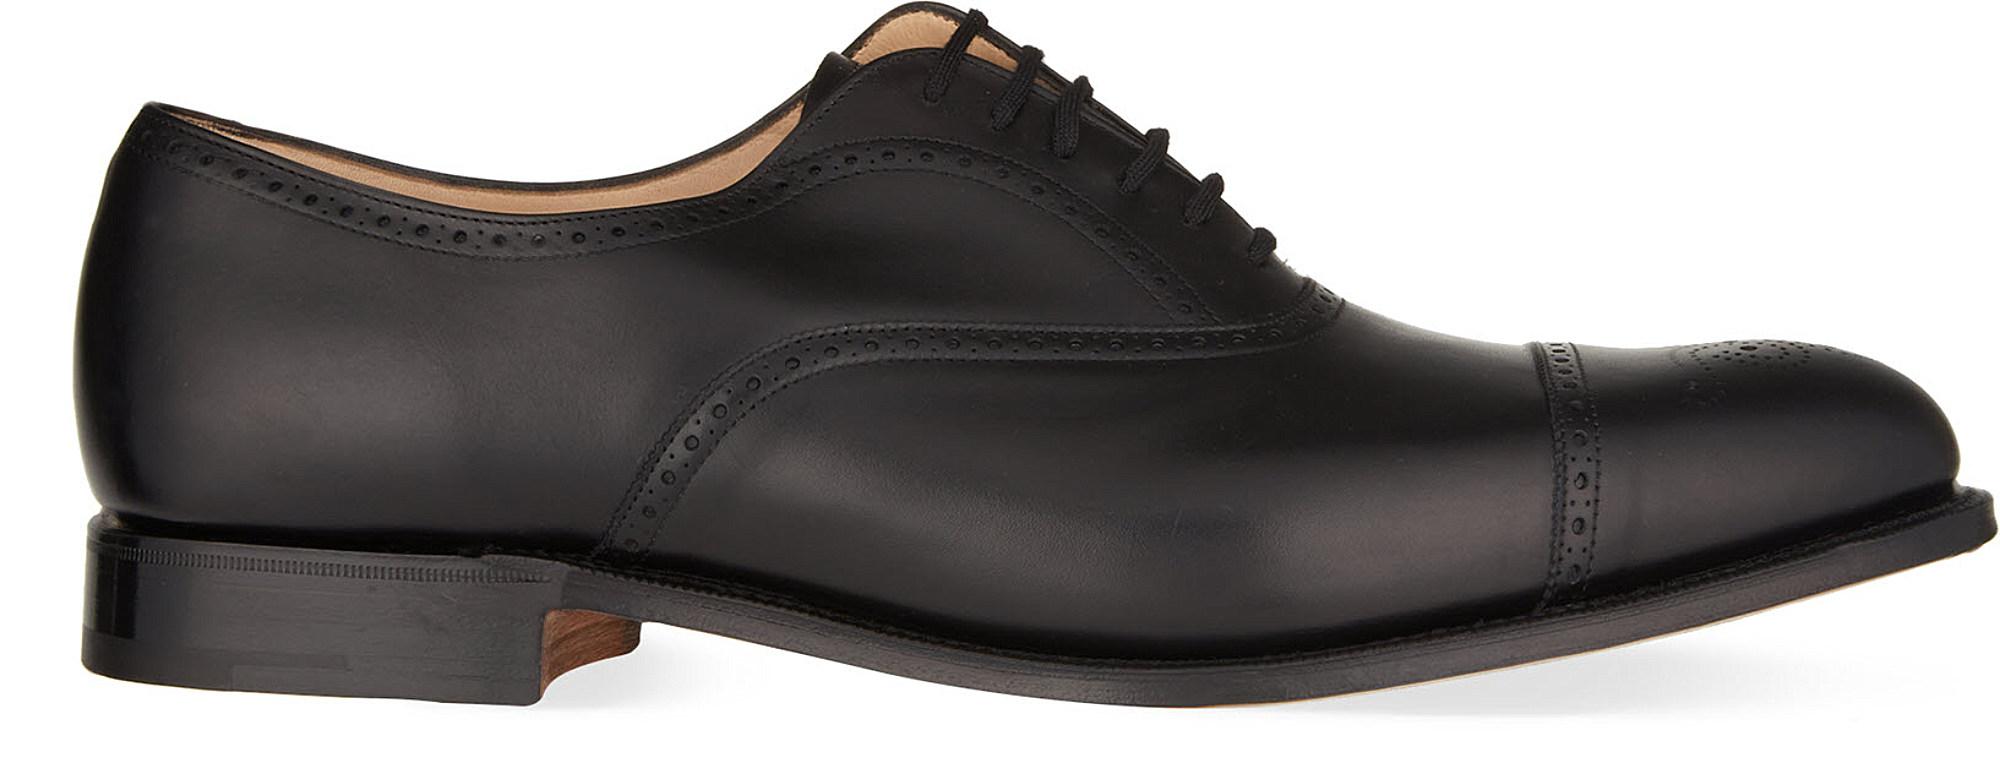 Lyst - Church's Toronto Oxford Shoes in Black for Men